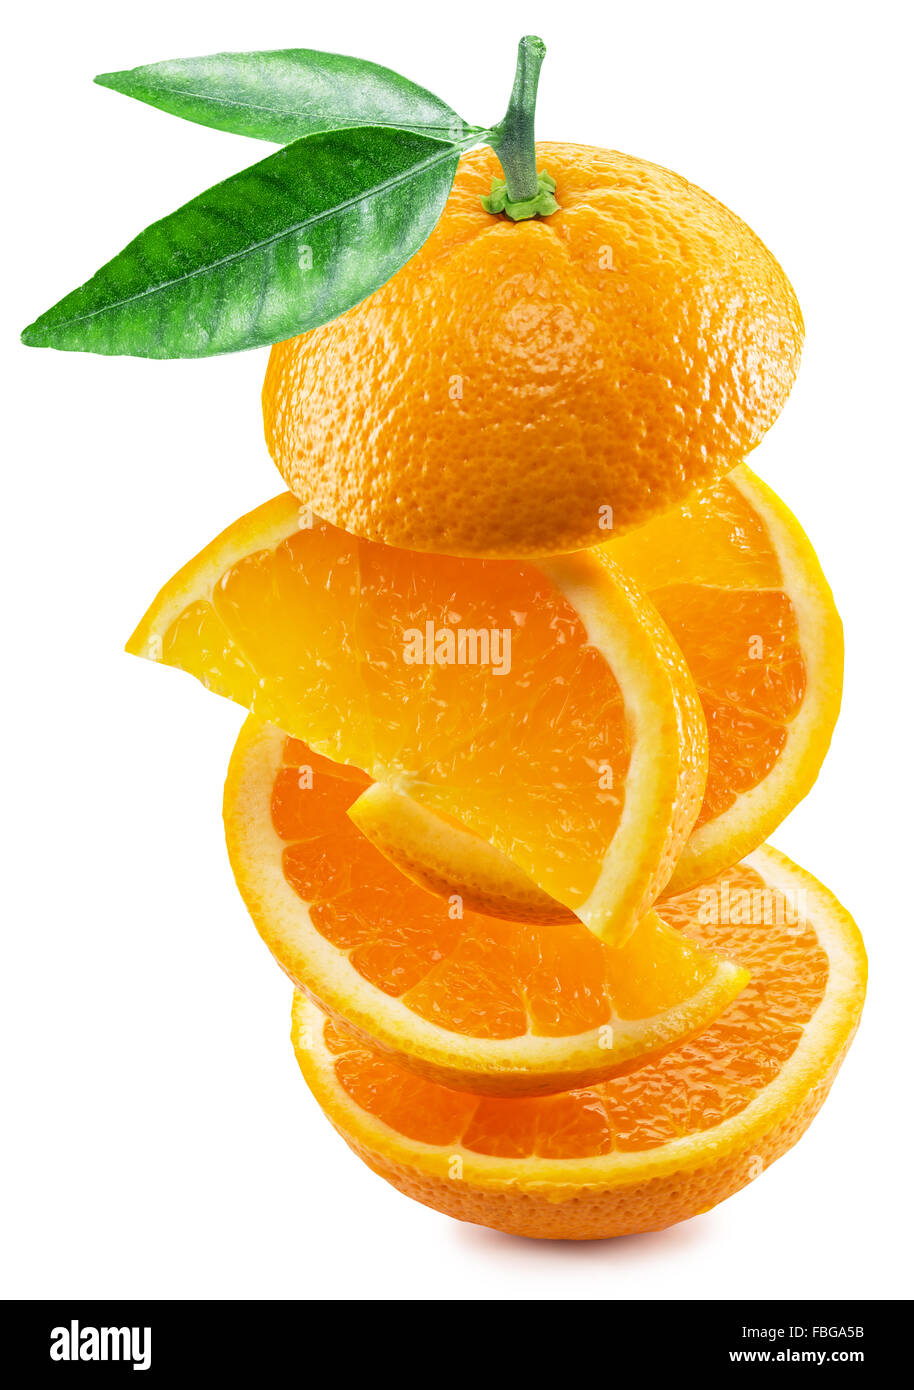 Orange slices on white background. File contains clipping paths. Stock Photo